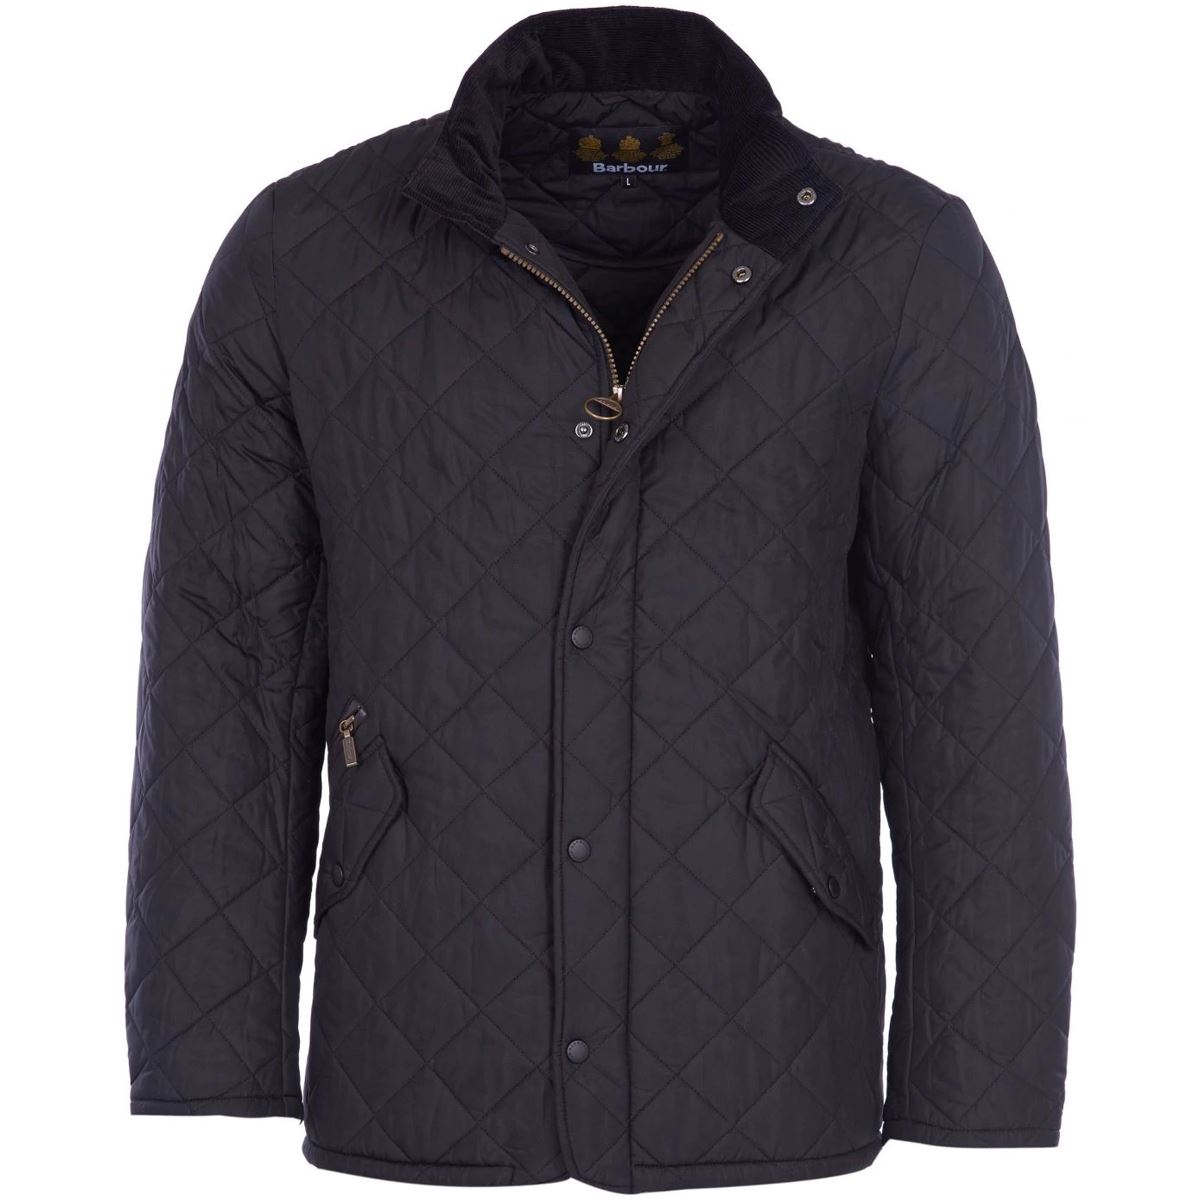 Could you provide the waist size for the Barbour Mens Chelsea Sportsquilt Jacket Size XL?